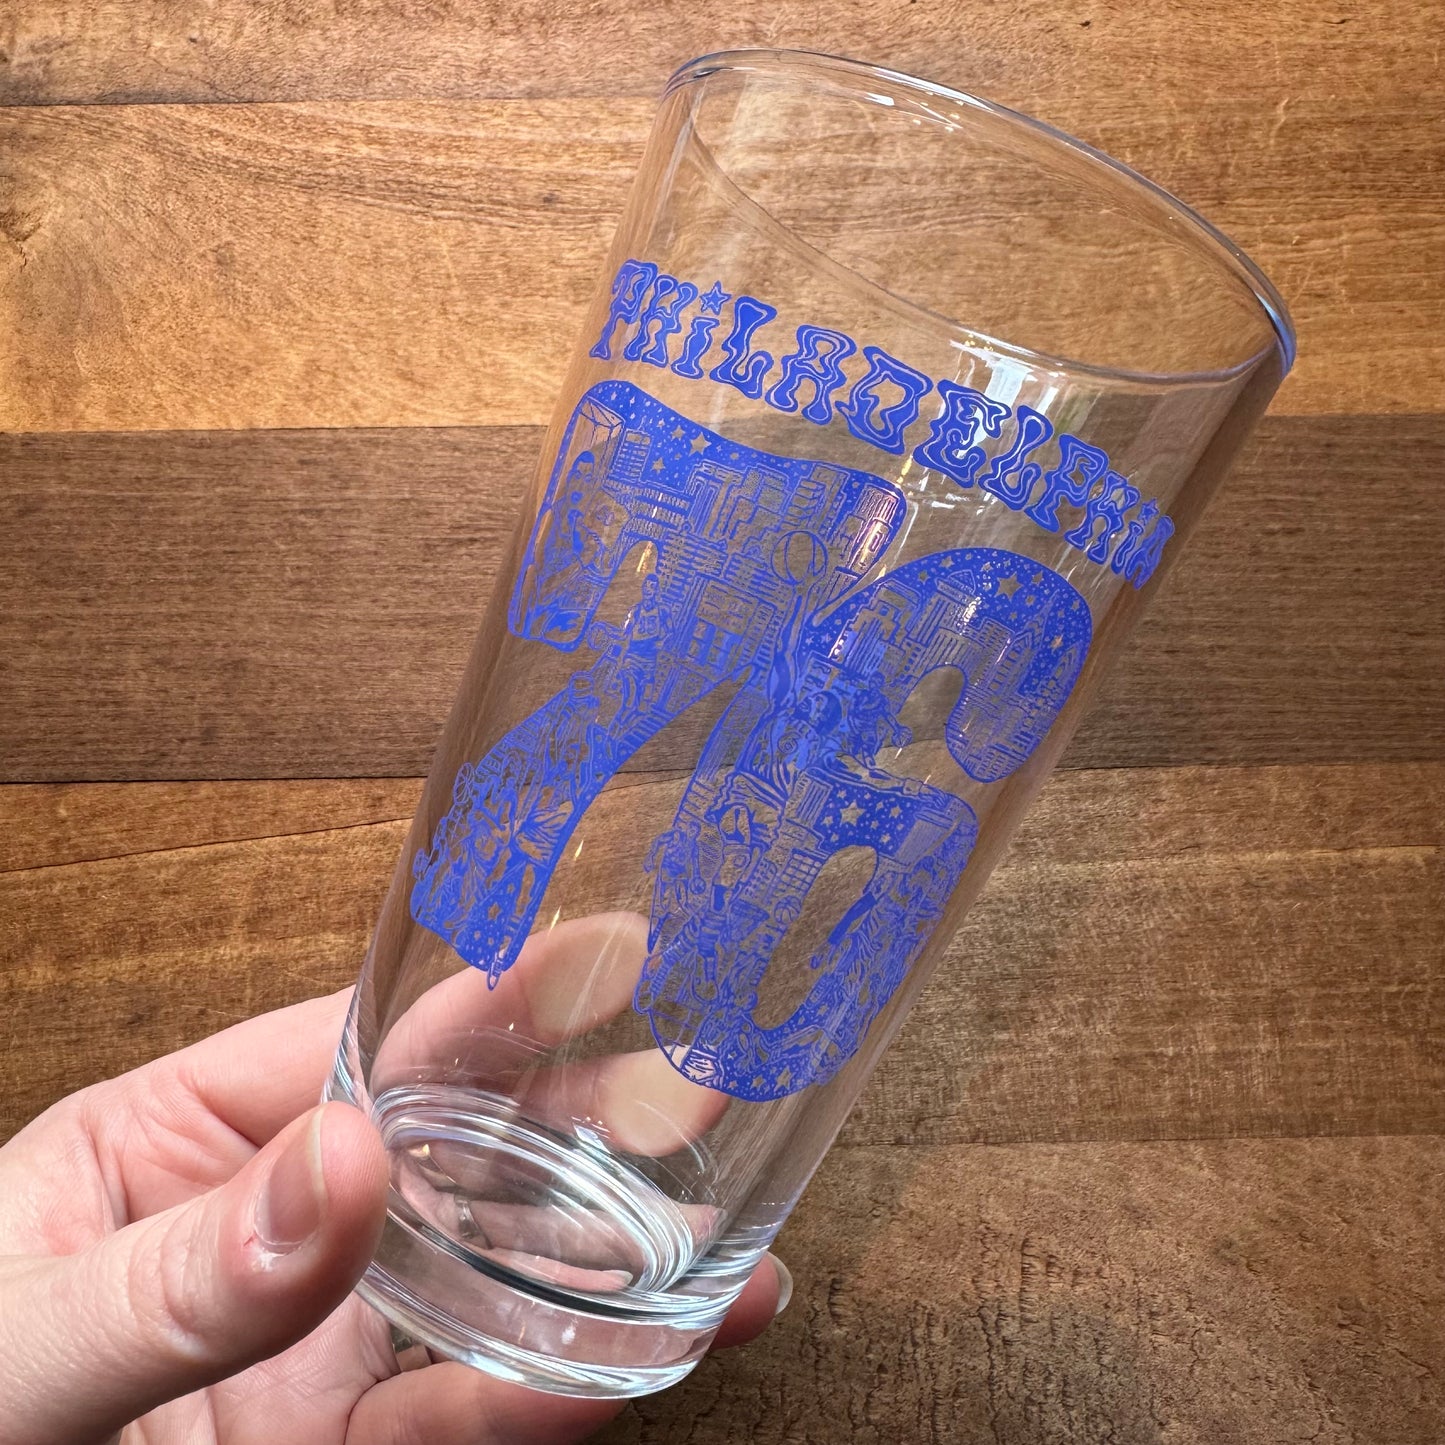 A hand holding an empty pint glass with blue Philadelphia-themed skyline decorative patterns - Philly Pint Glasses from Paul Carpenter.